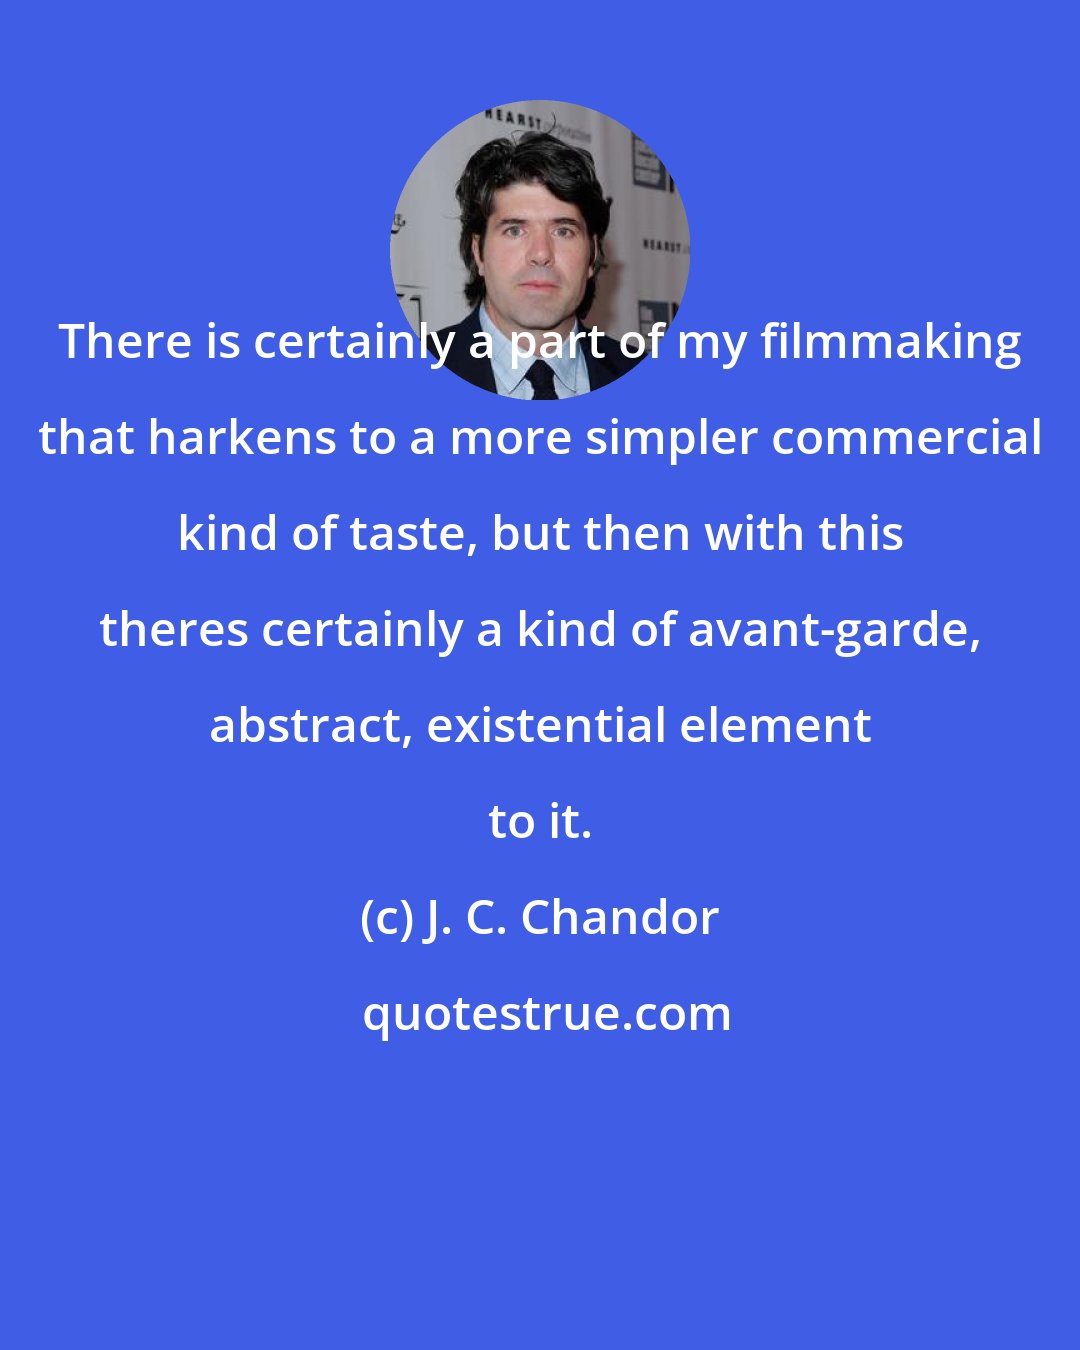 J. C. Chandor: There is certainly a part of my filmmaking that harkens to a more simpler commercial kind of taste, but then with this theres certainly a kind of avant-garde, abstract, existential element to it.